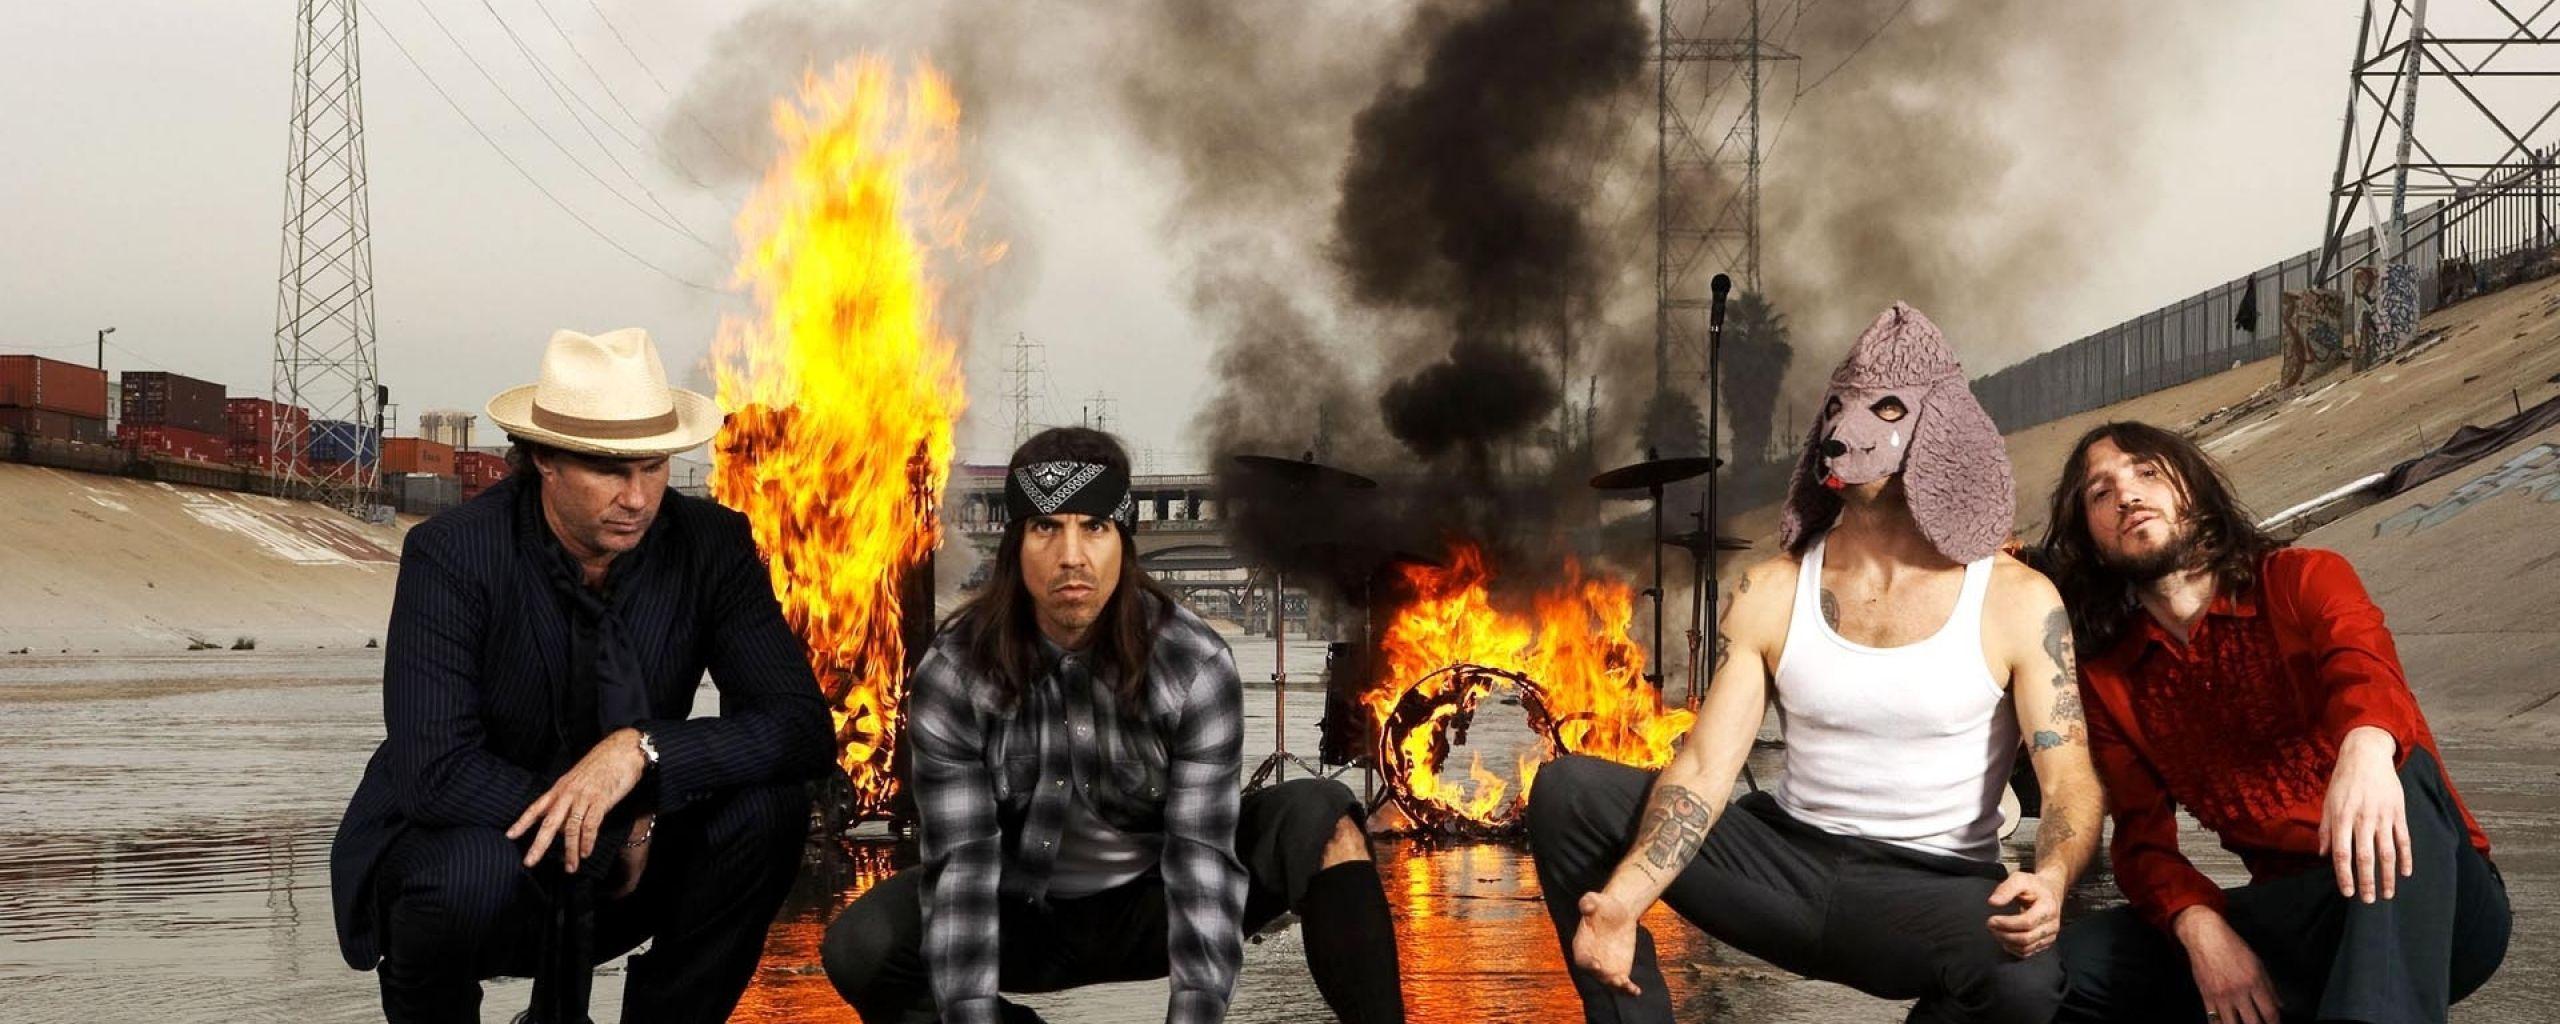 Download Wallpaper 2560x1024 Red hot chili peppers, Fire, Smoke